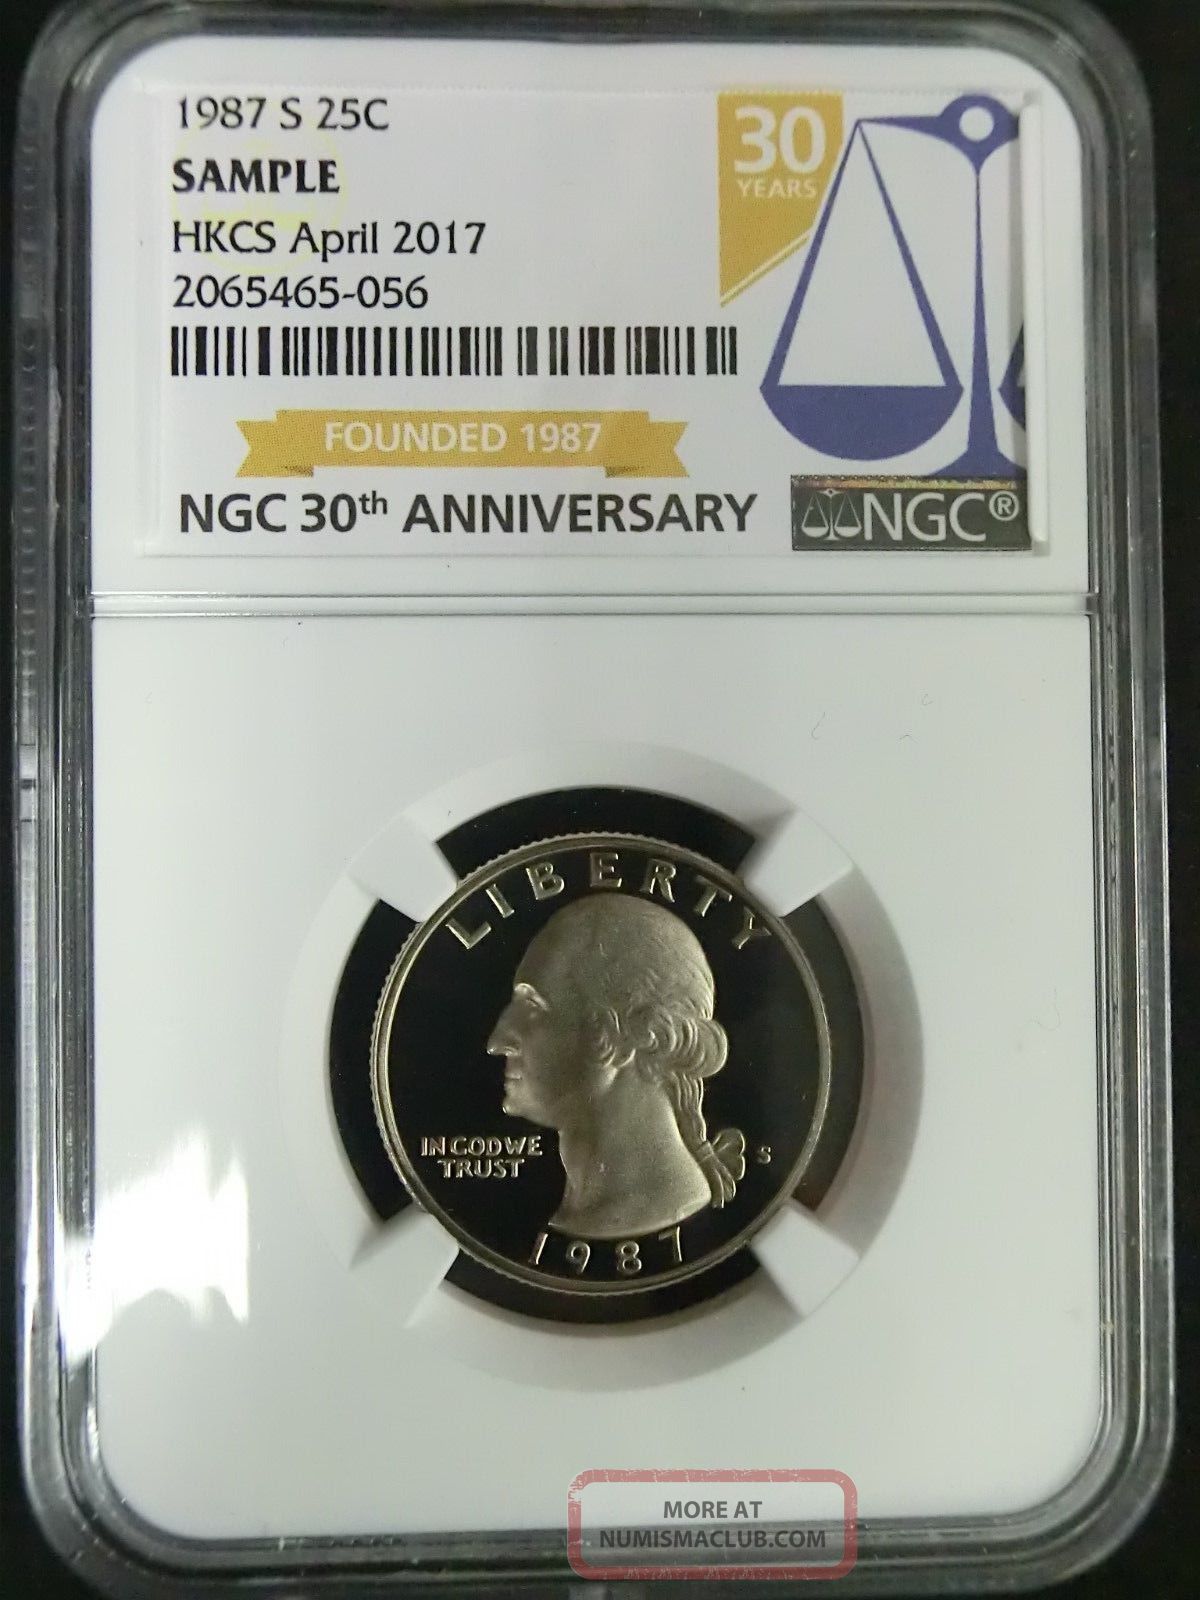 Ngc Sample - Us 1987s 25 Cents Proof For Hkcs April 2017 In Hong Kong Asia photo